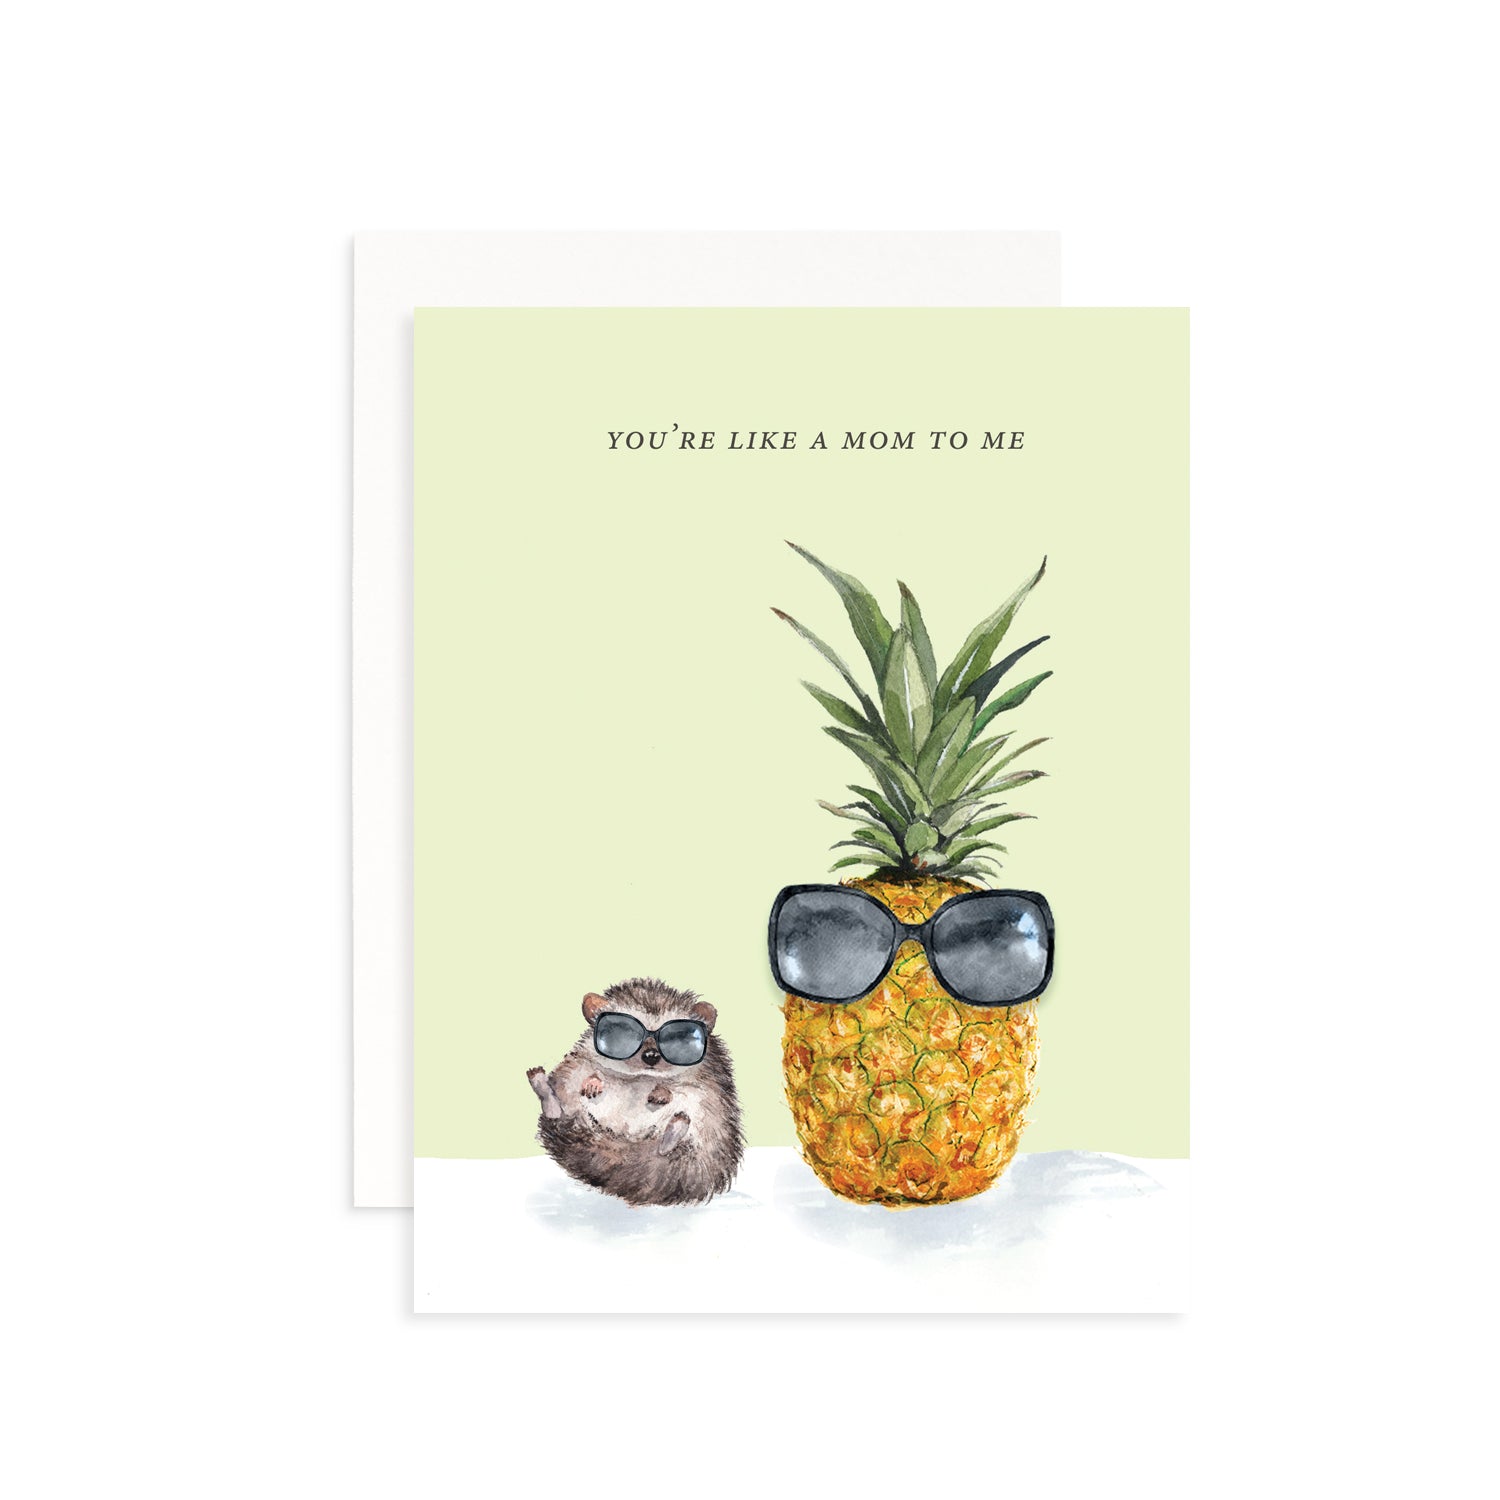 You're Like a Mom to Me Greeting Card